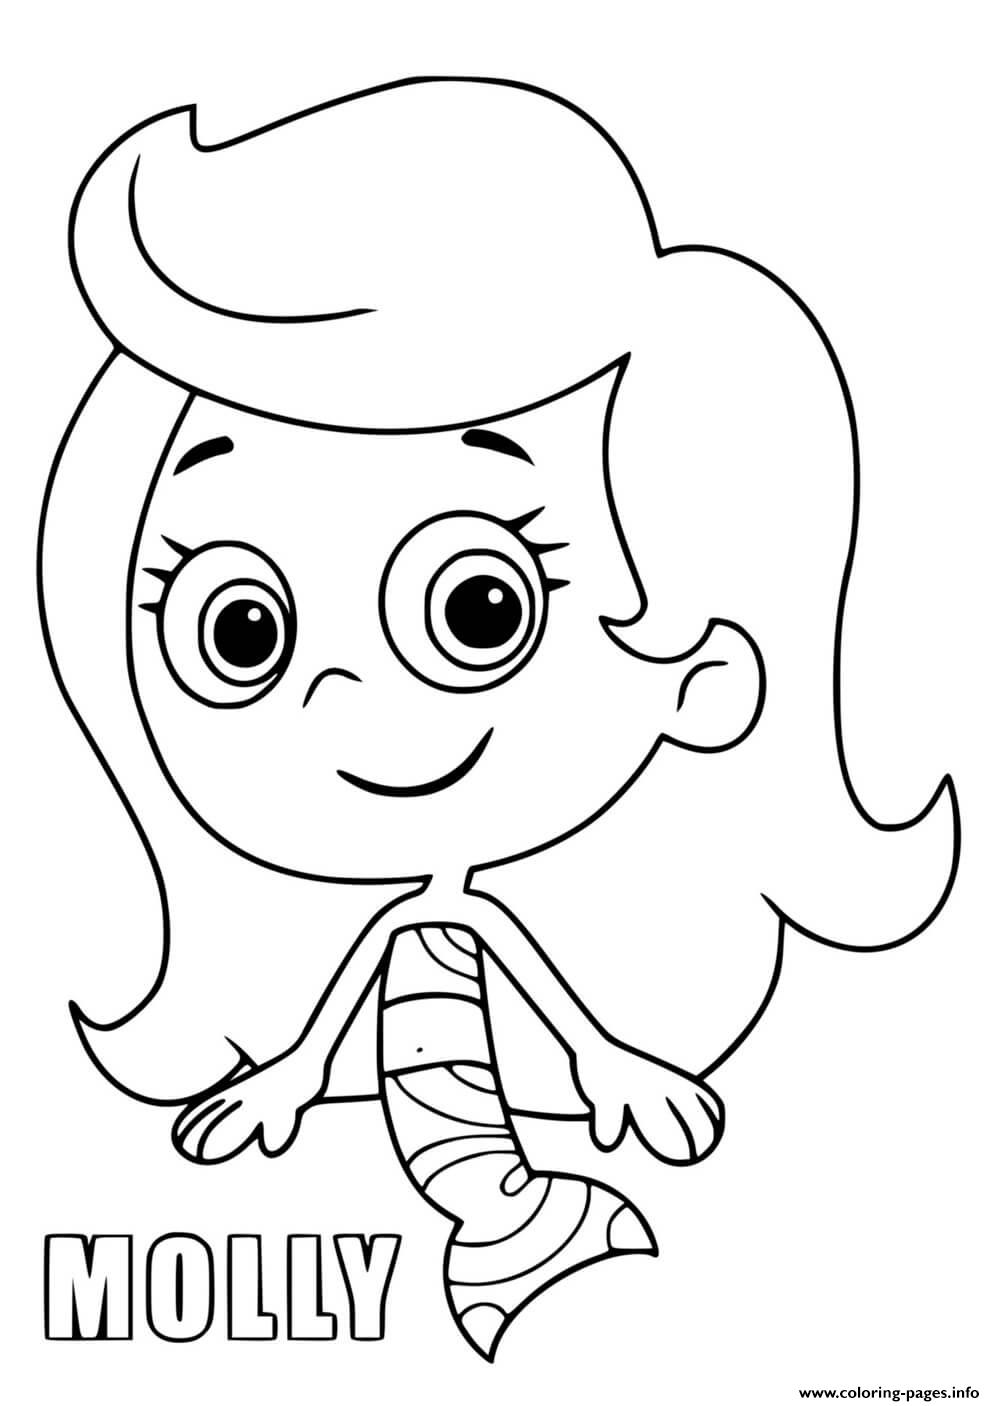 Molly Cute Bubble Guppies coloring pages